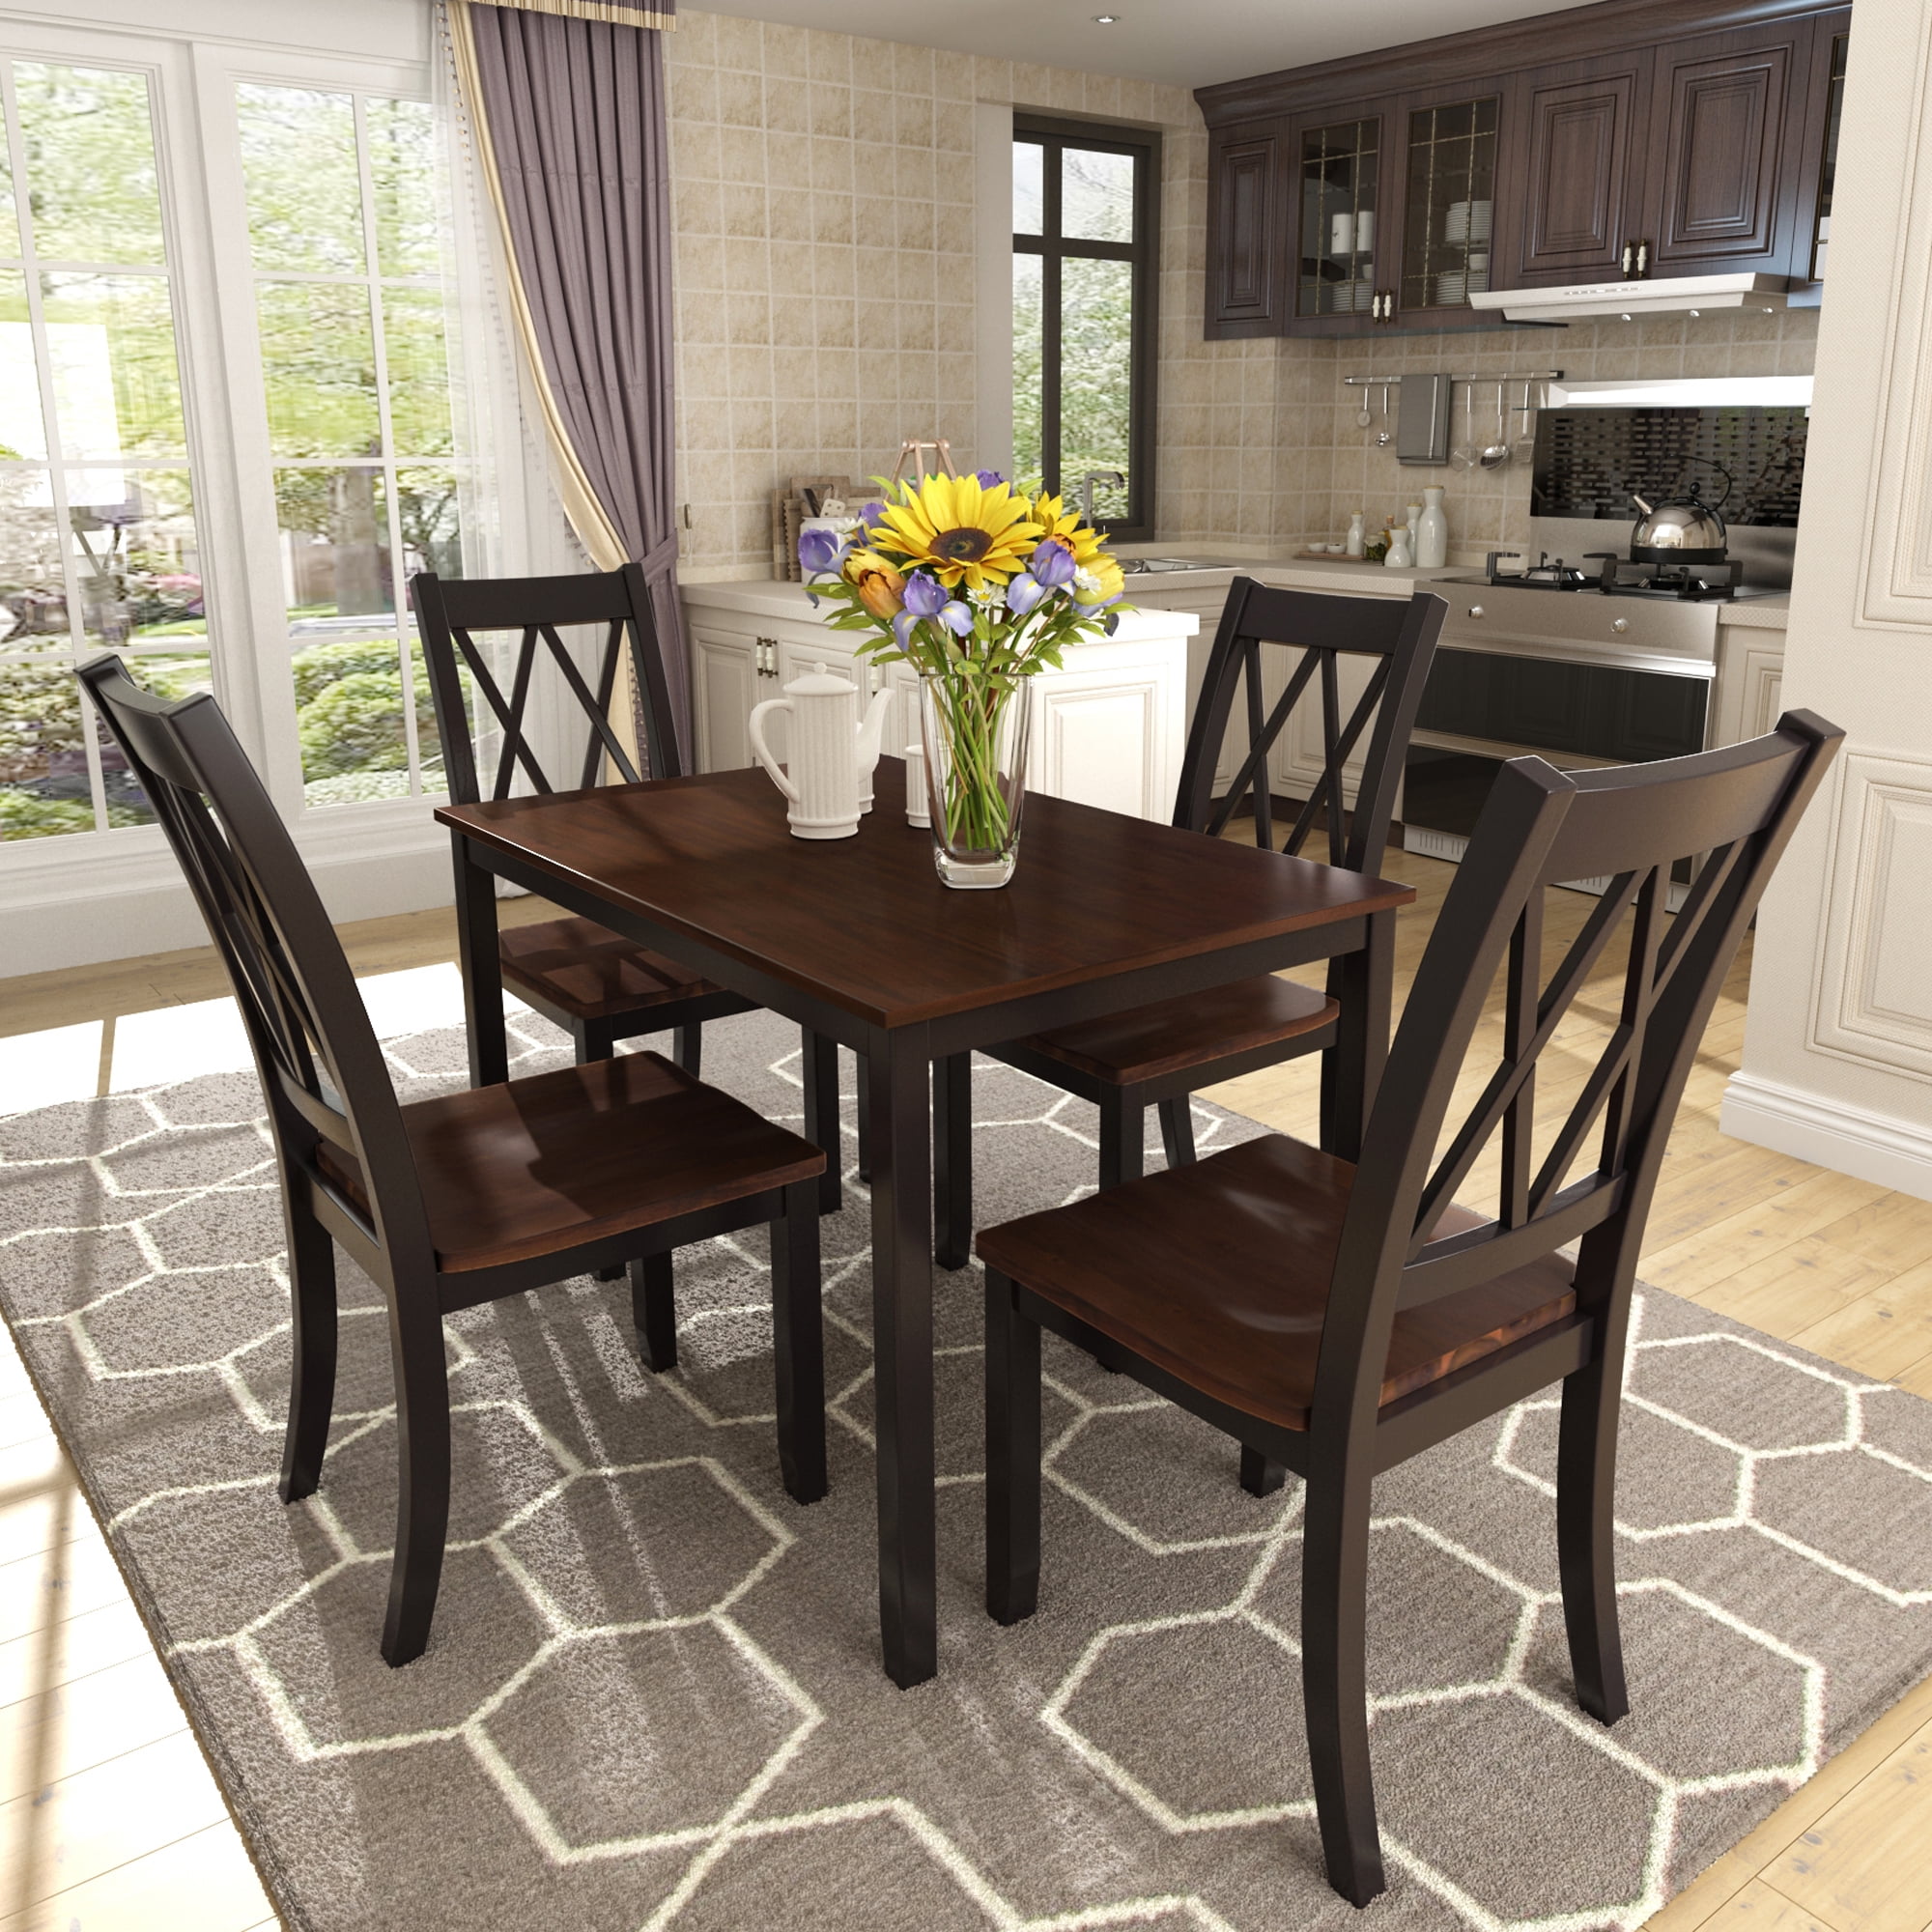 4547 X 2952 X 30 Dining Table Sets